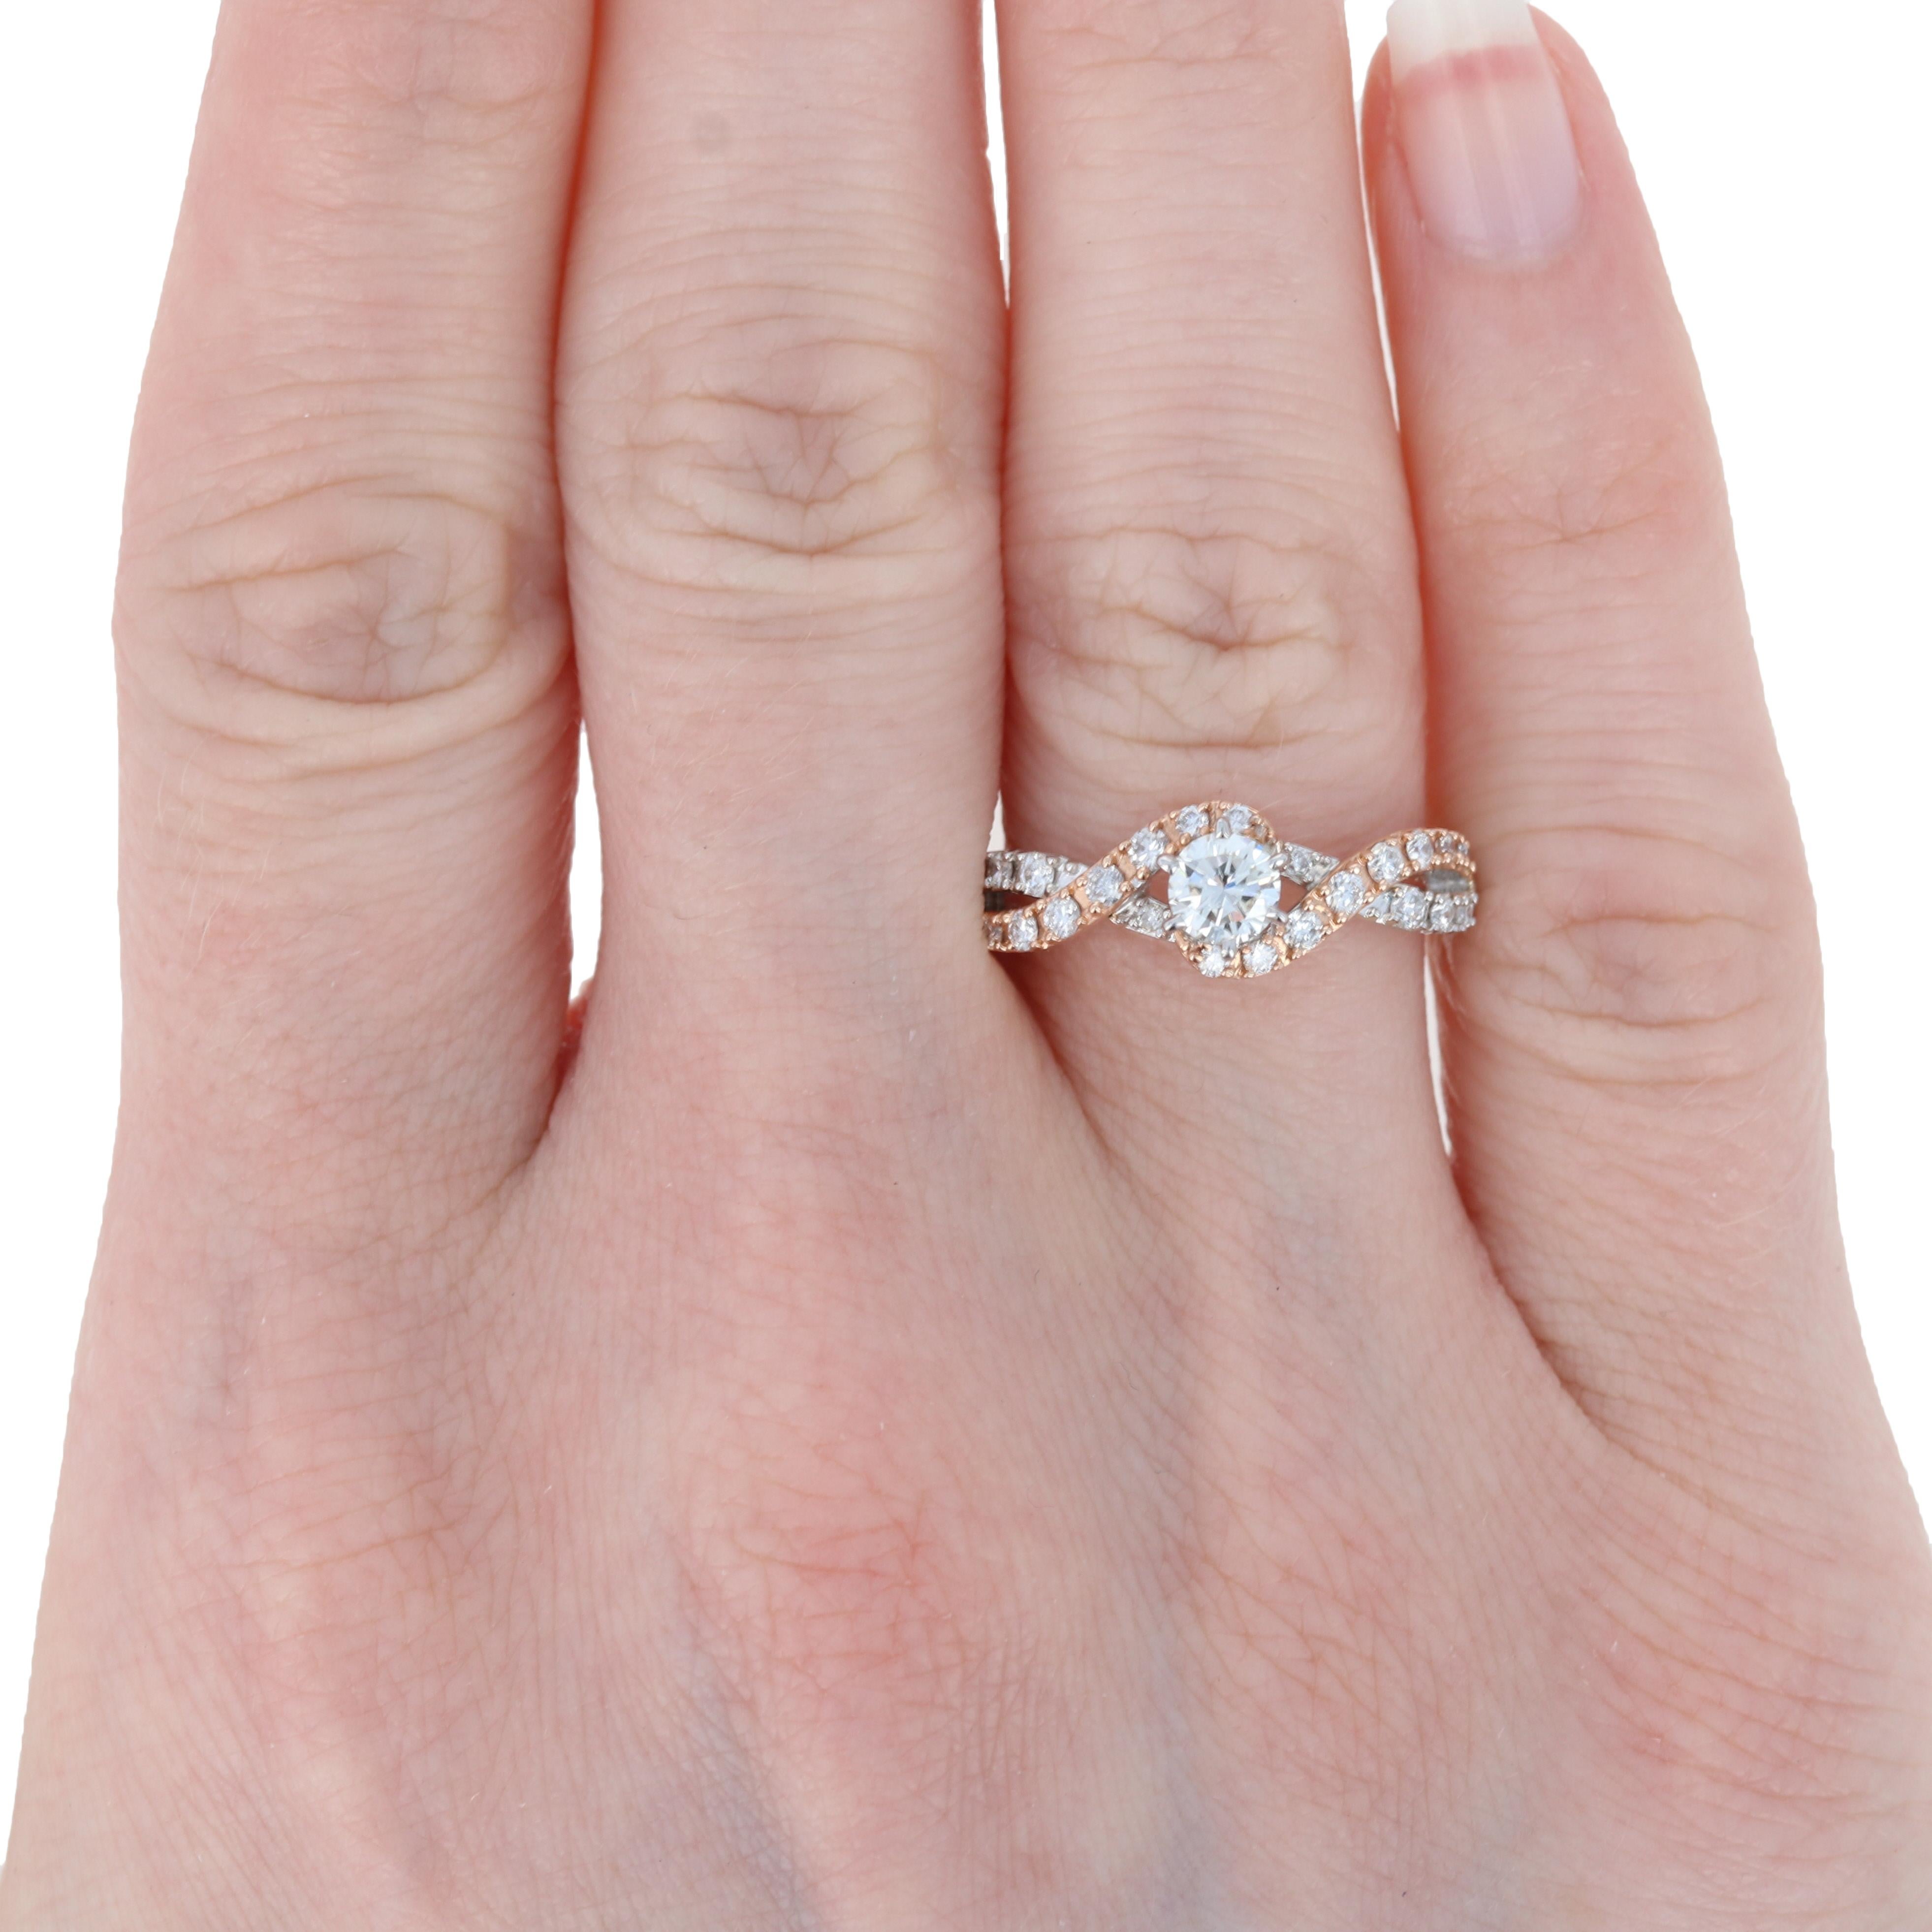 You've met the woman of your dreams. Now make her dreams come true when you propose with this exquisite engagement ring! Fashioned in 14k white gold with accents of 14k rose gold, this NEW piece features a medley of natural diamonds. The centerpiece